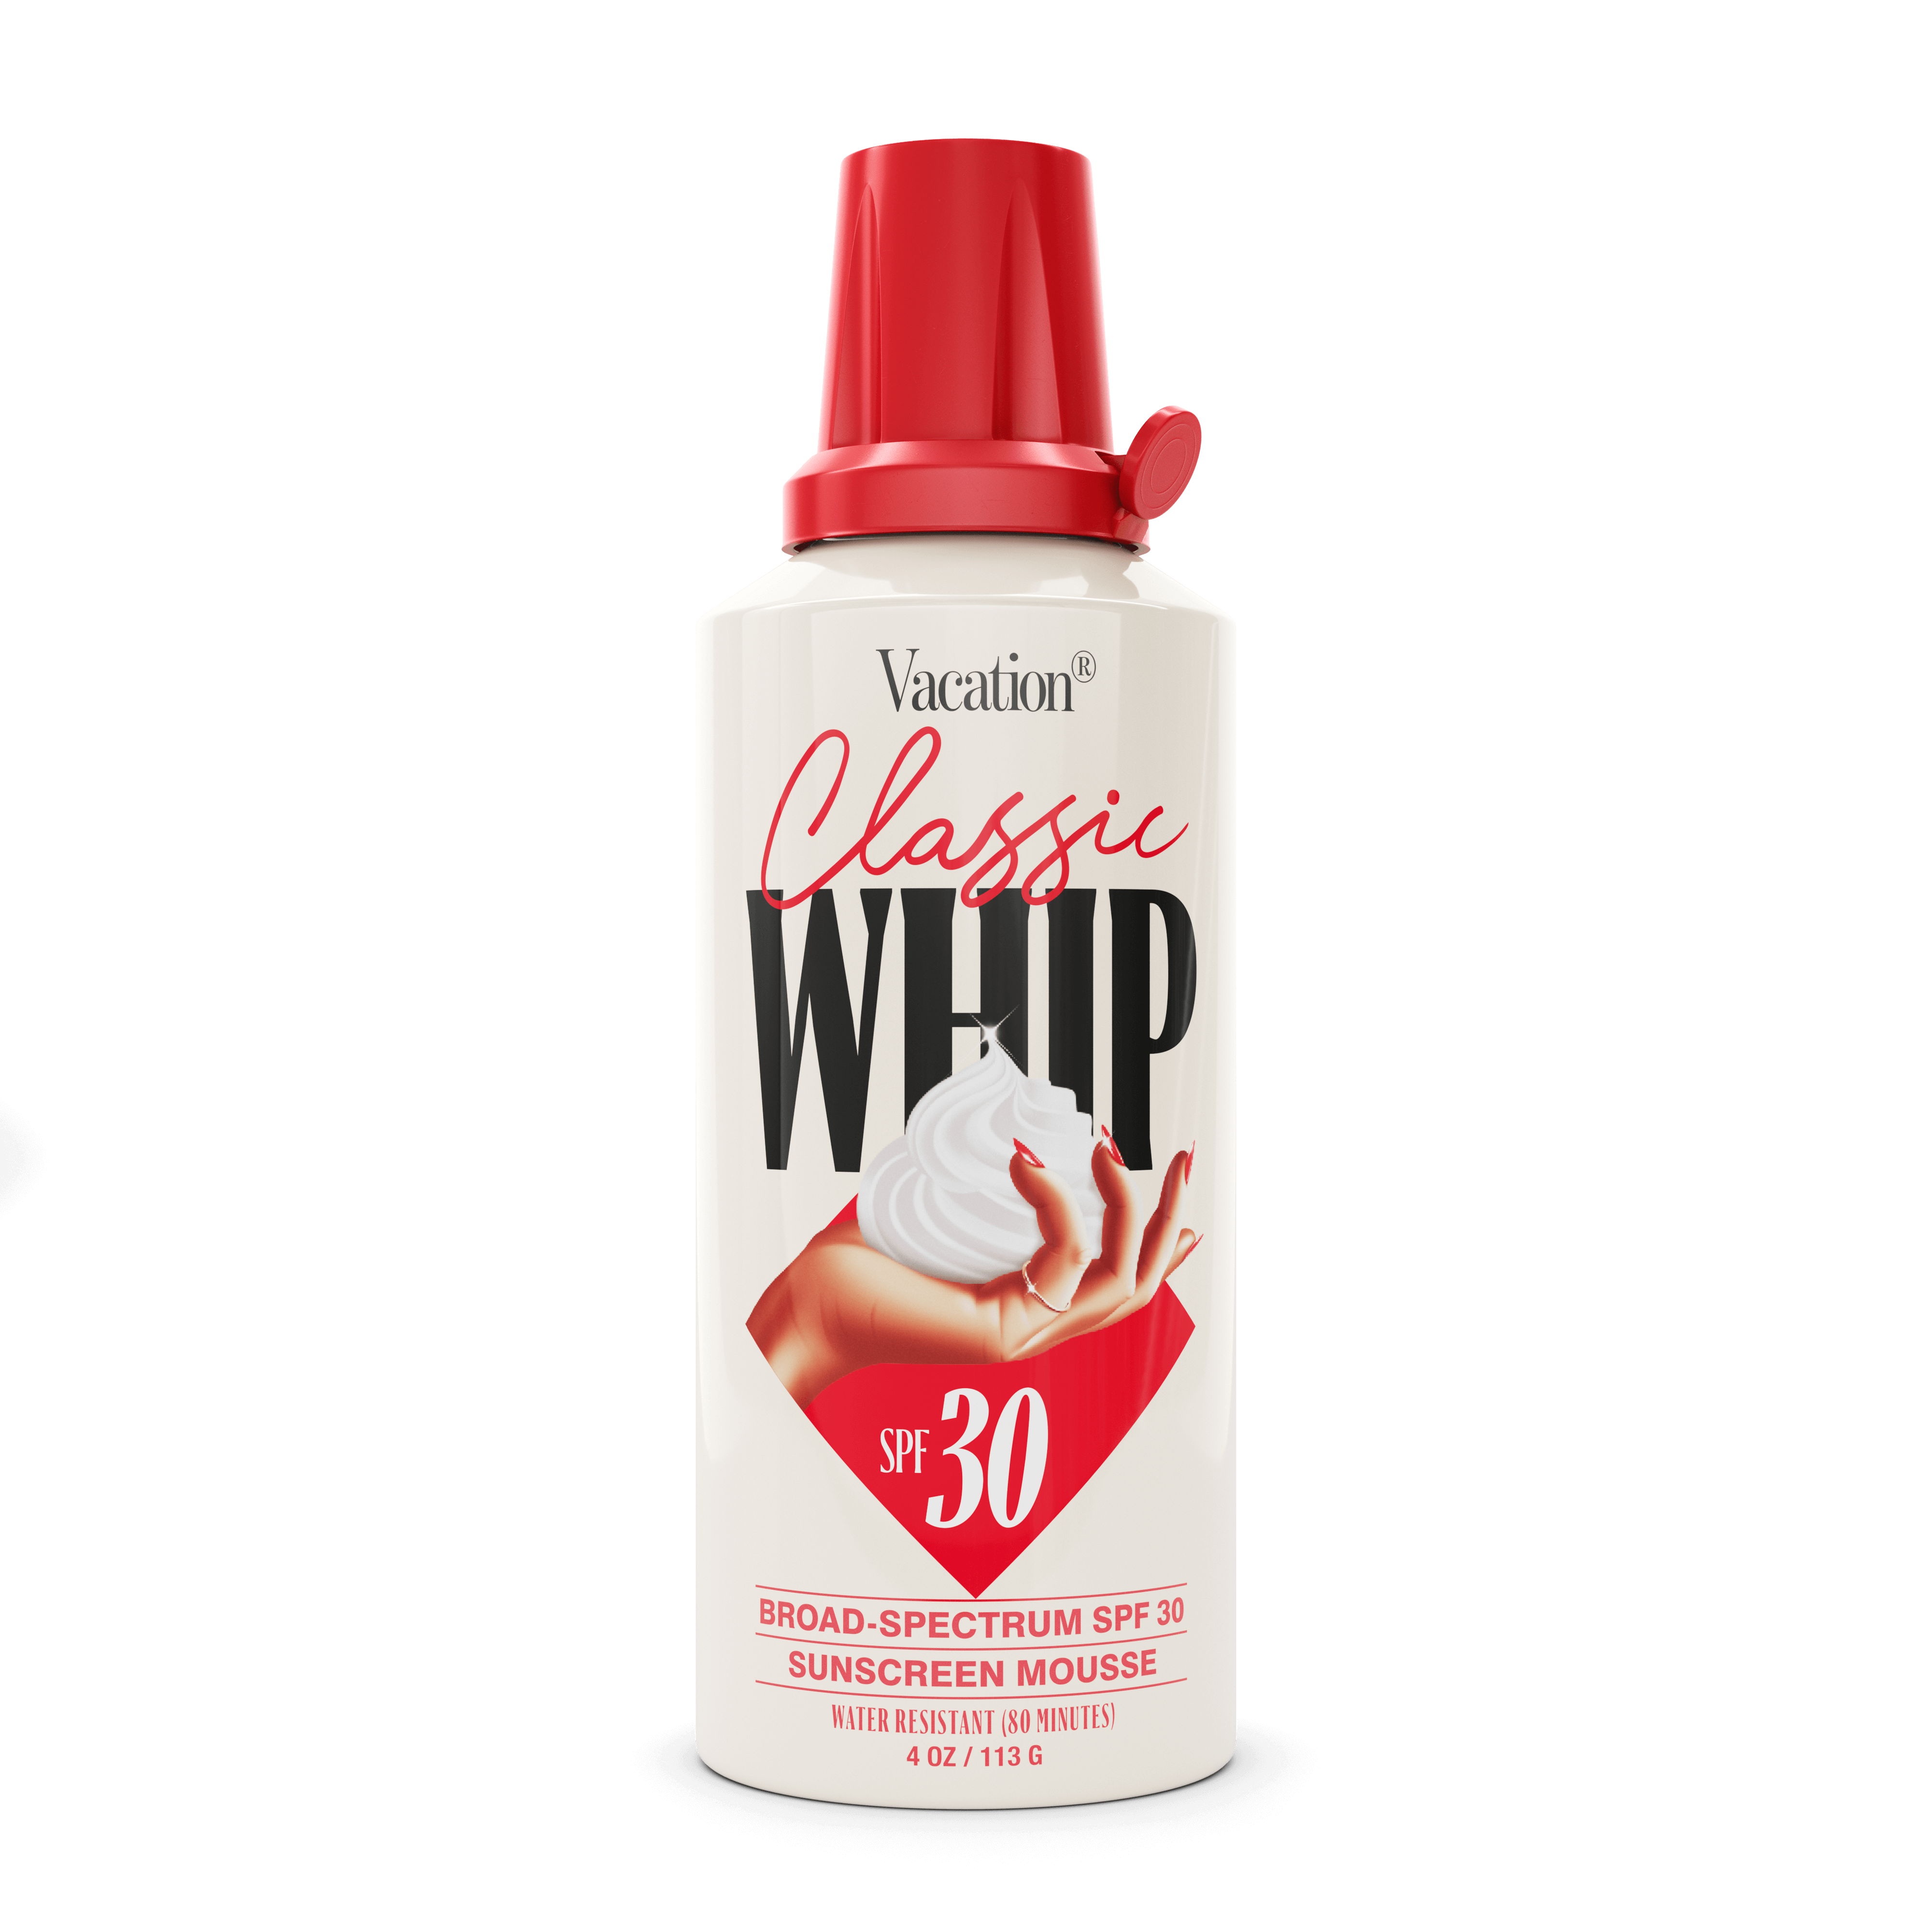 Vacation Classic Whip SPF 30 main image